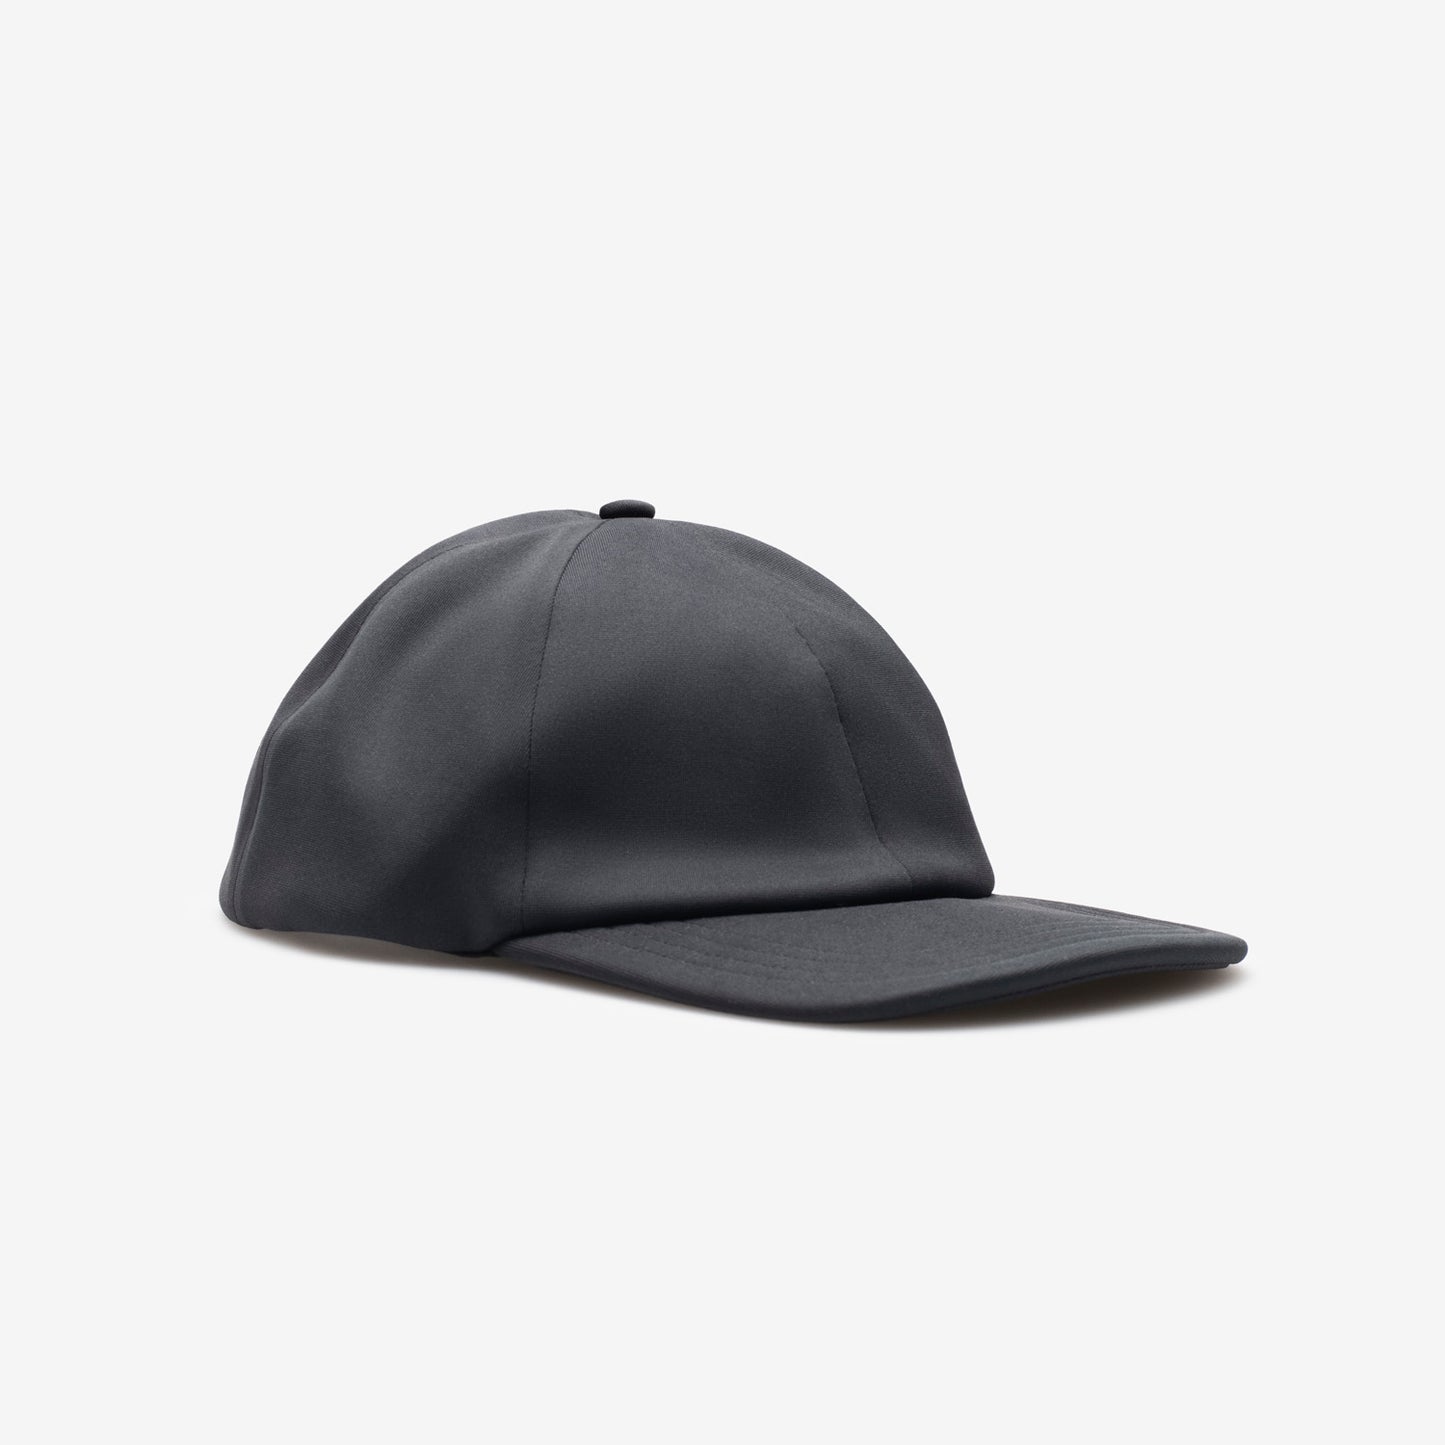 The Everything Hat Jet Black